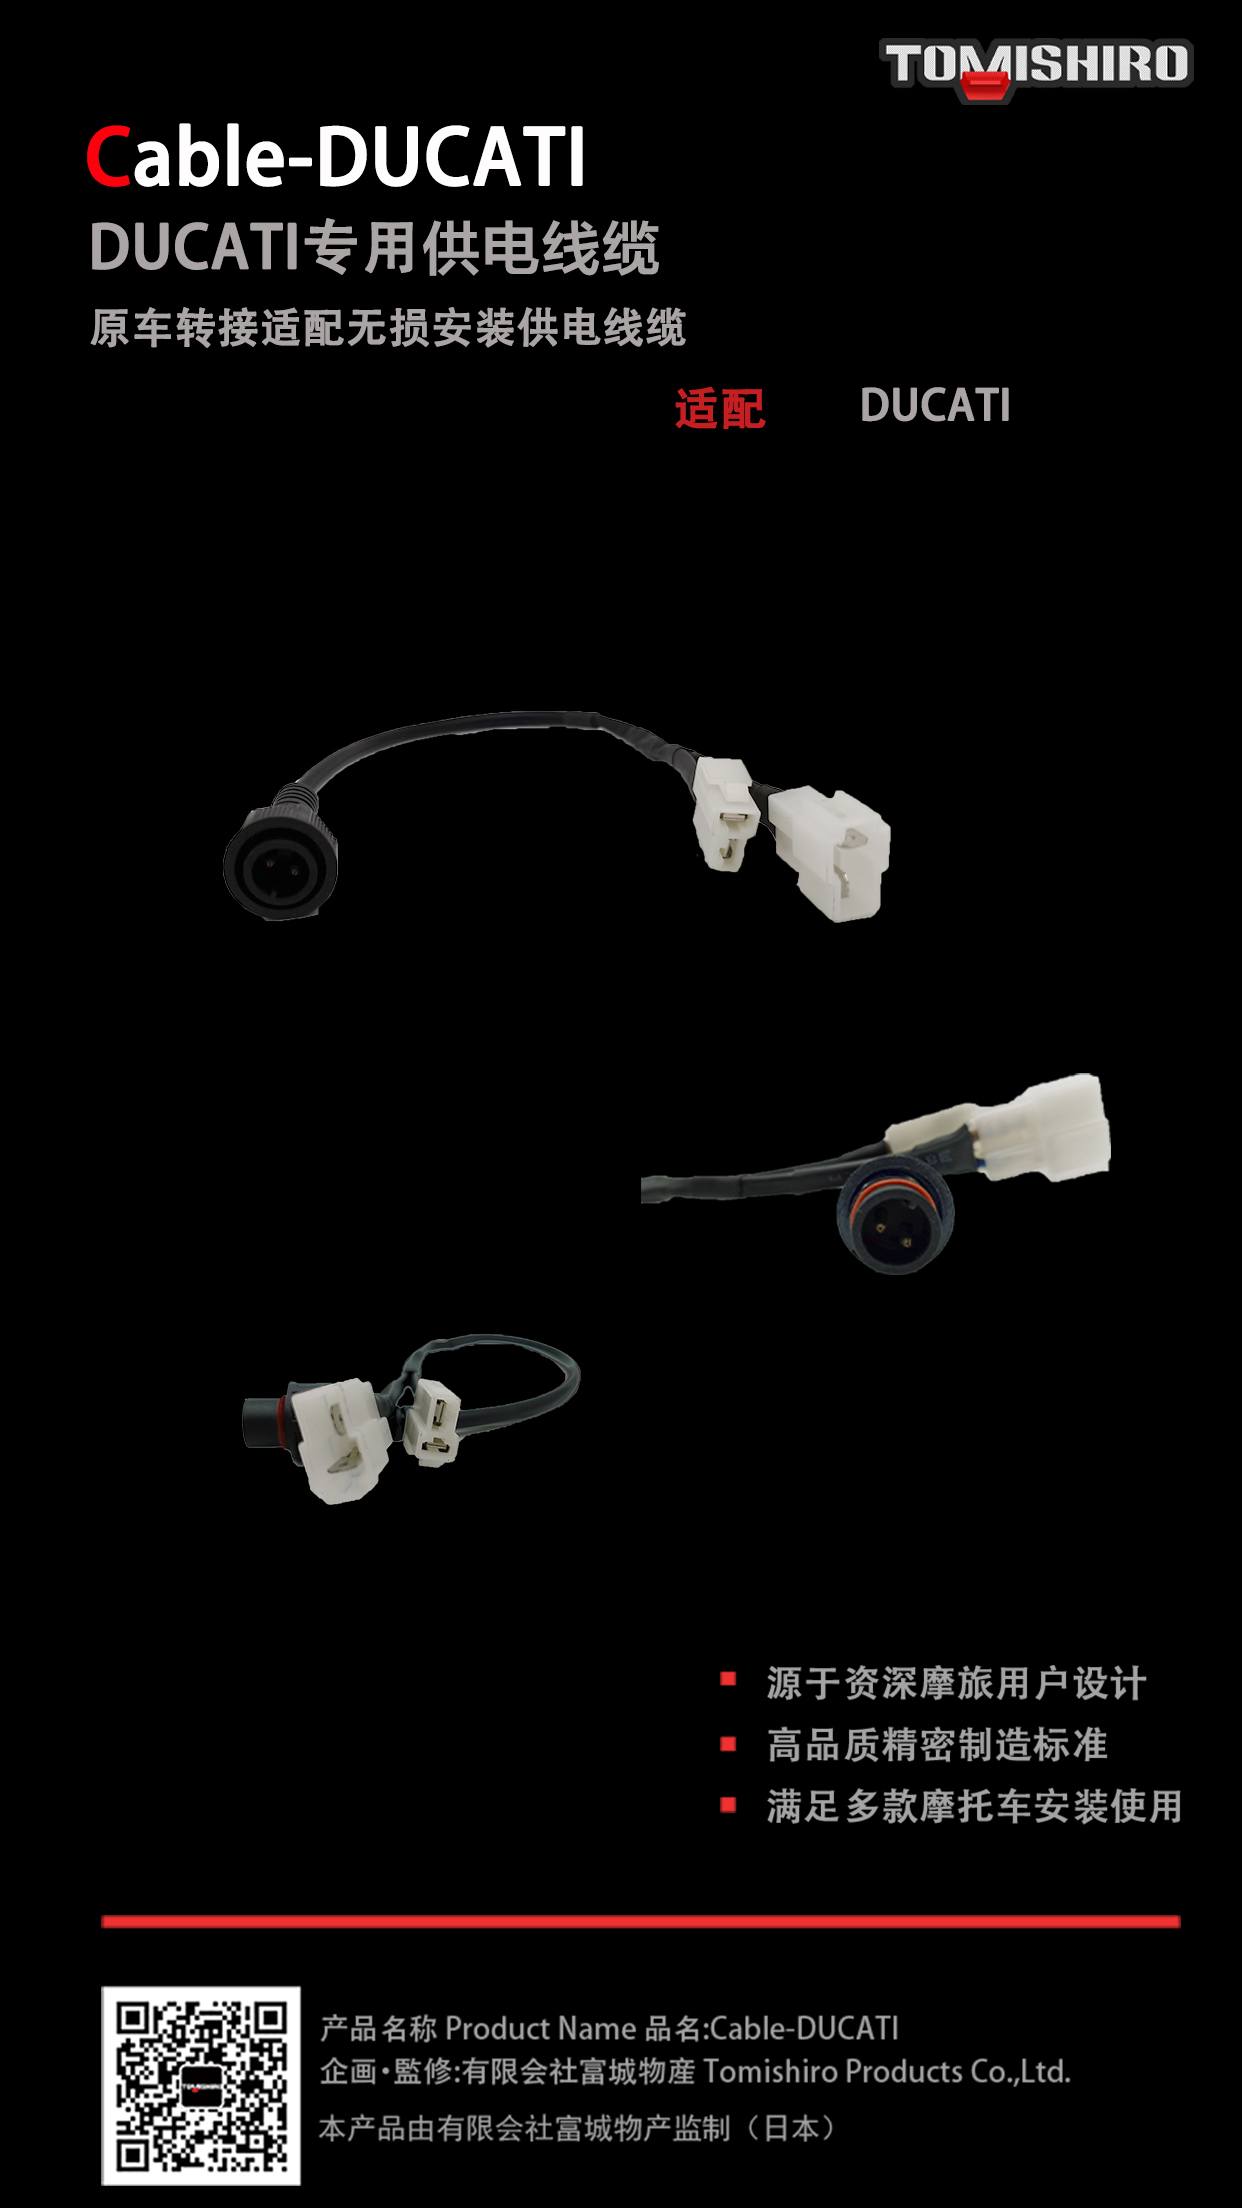 Cable-DUCATI实物图.jpg